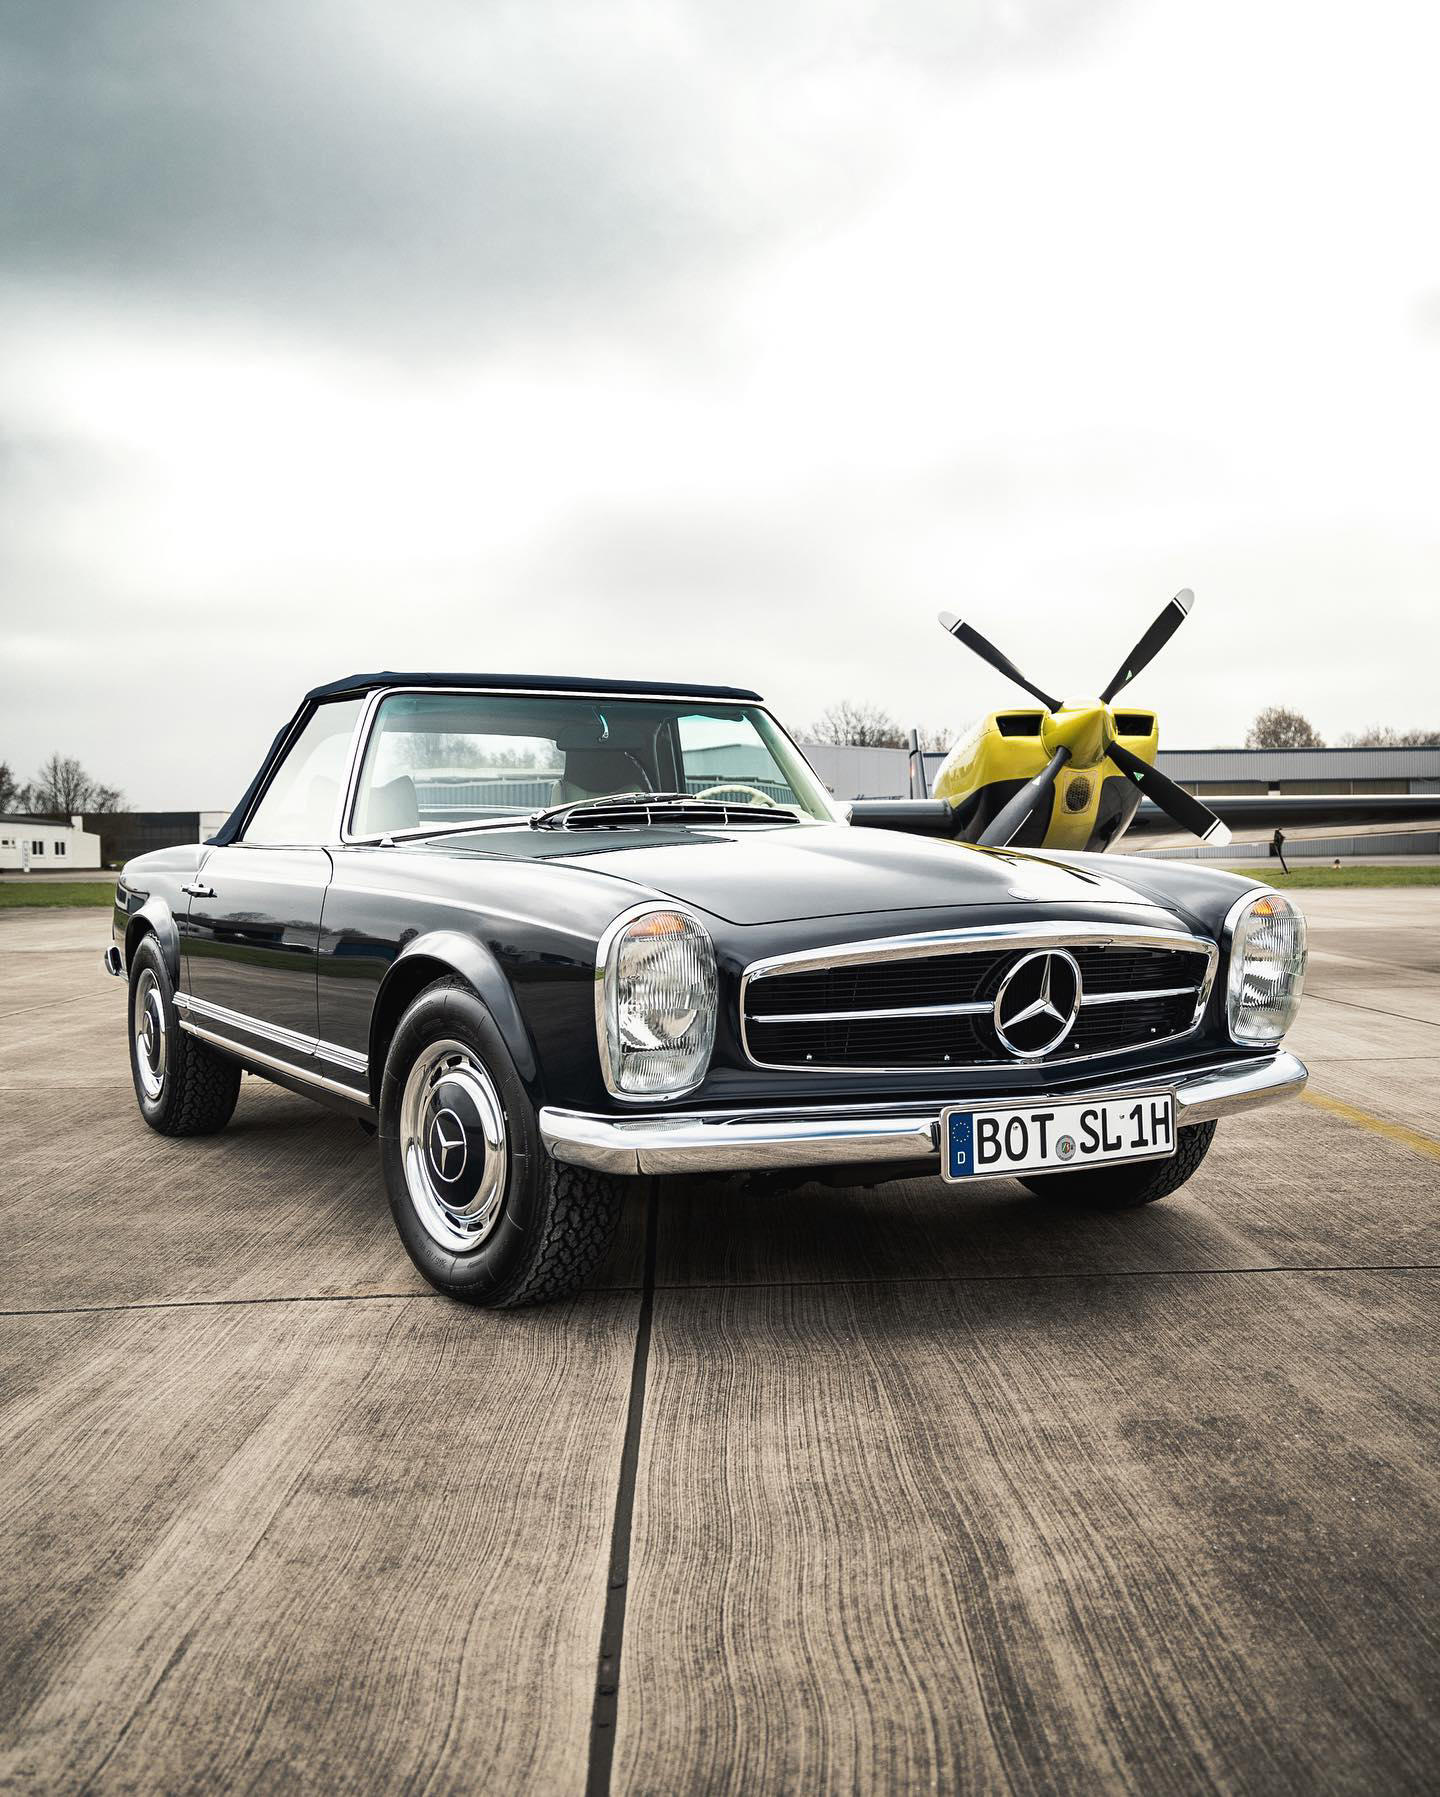 The flying ace among vintage sports car icons